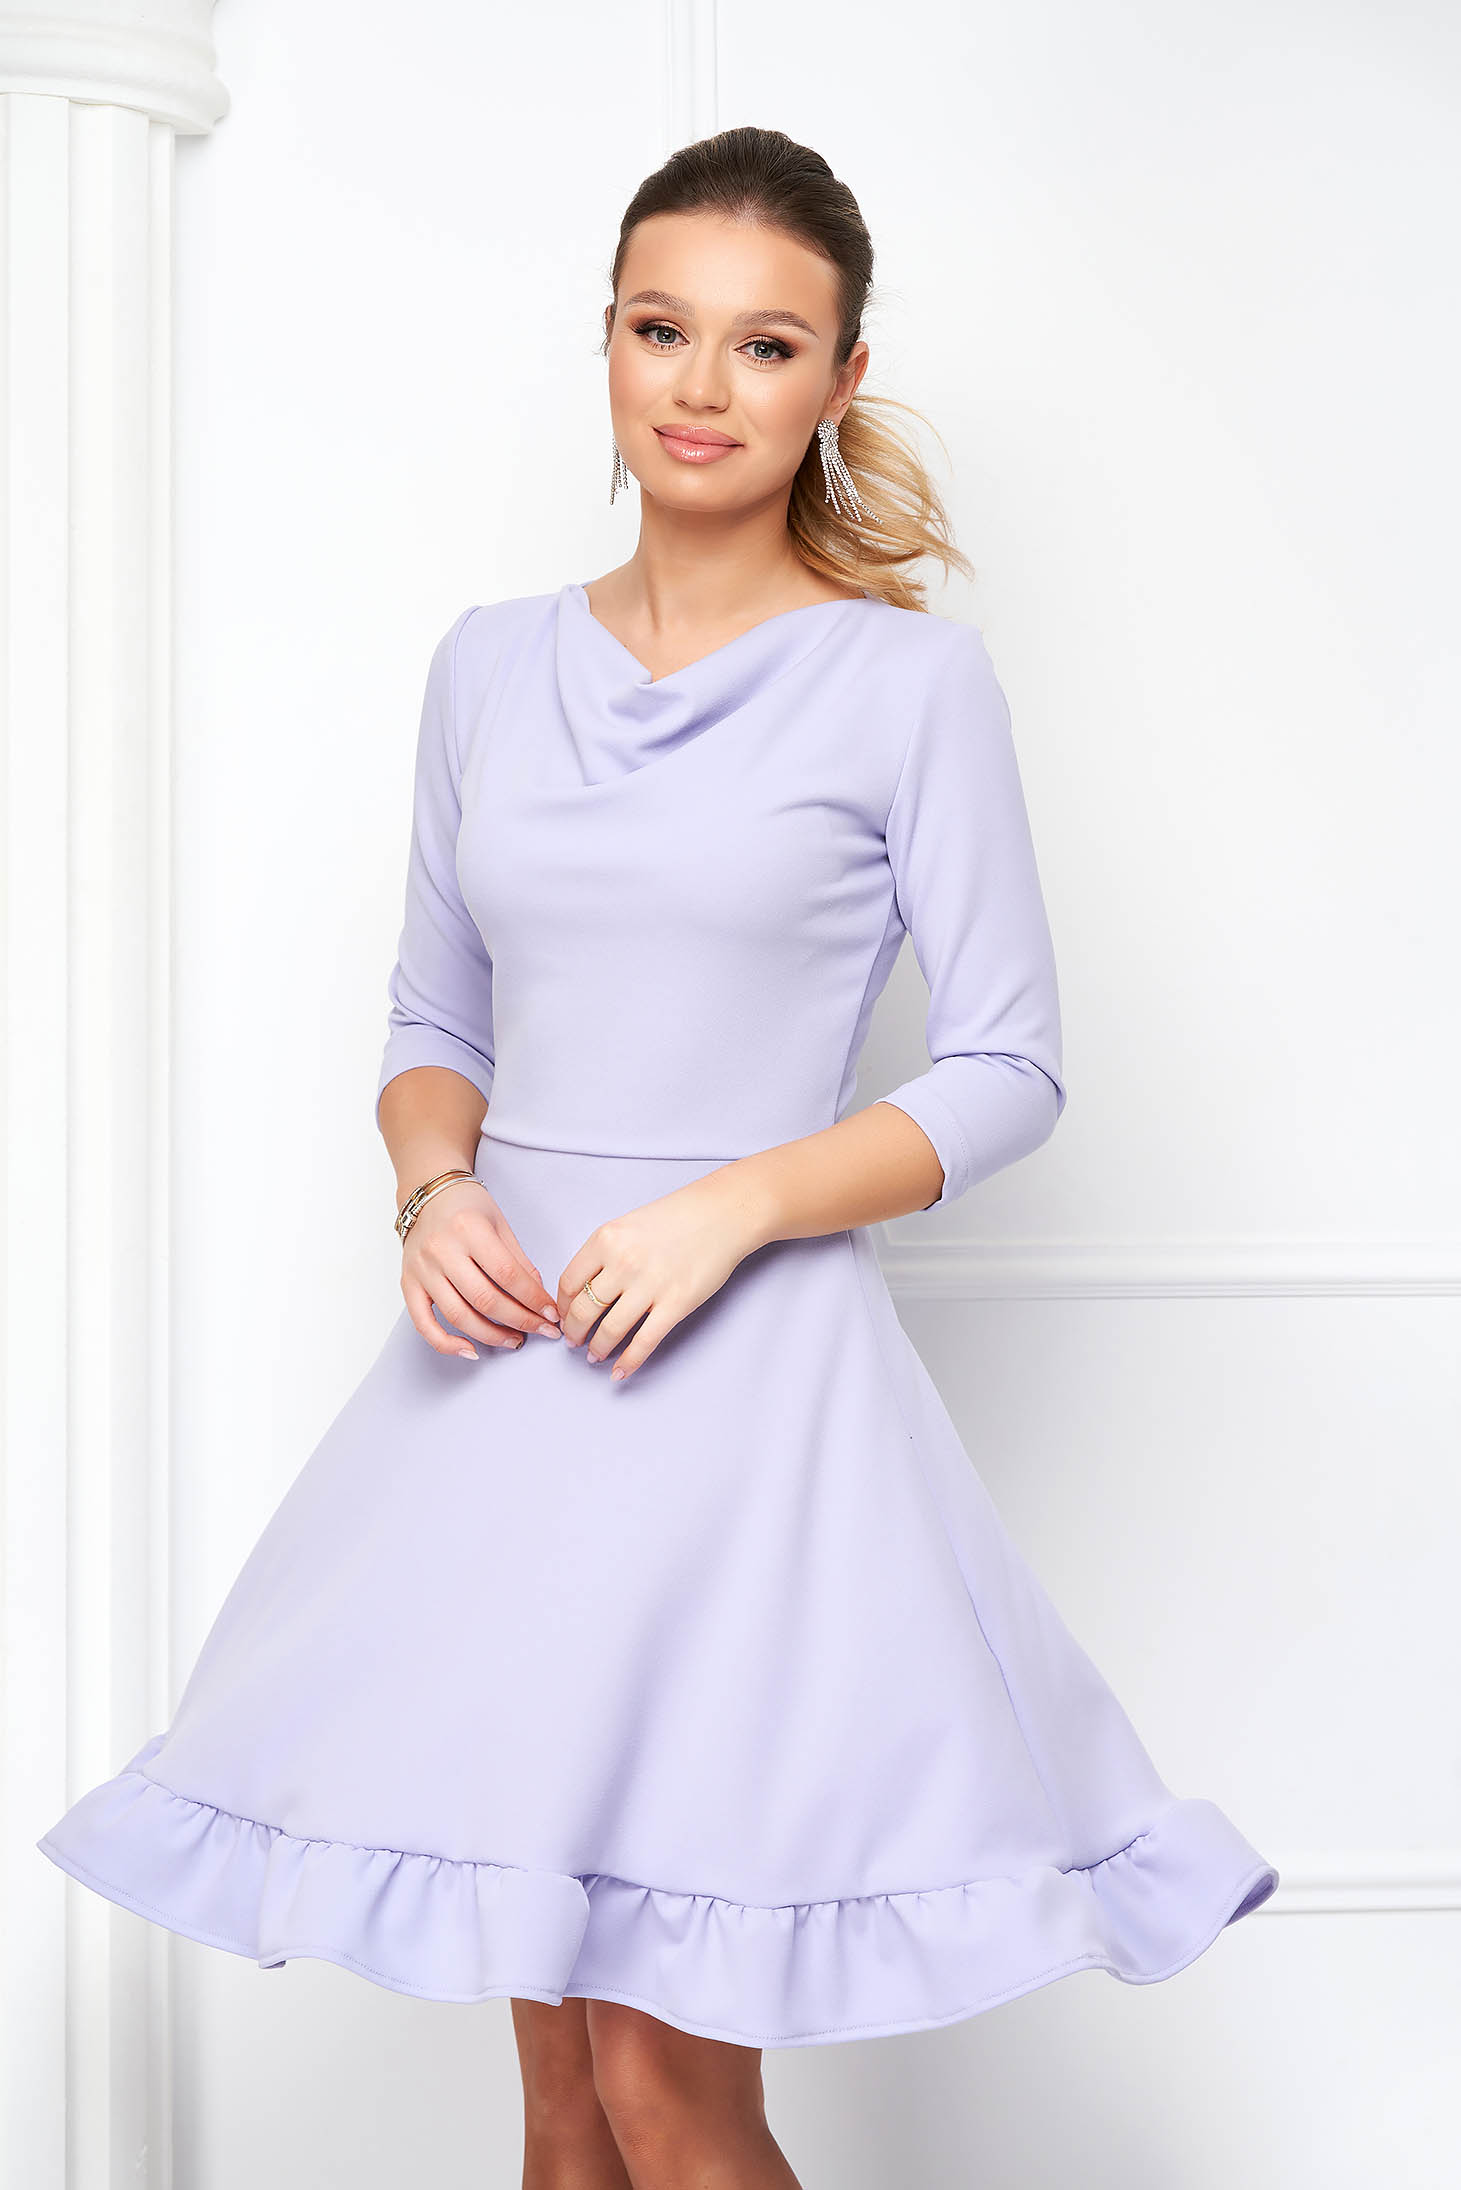 Lilac crepe dress in A-line with dropped neckline and ruffles at the base of the dress - StarShinerS 1 - StarShinerS.com